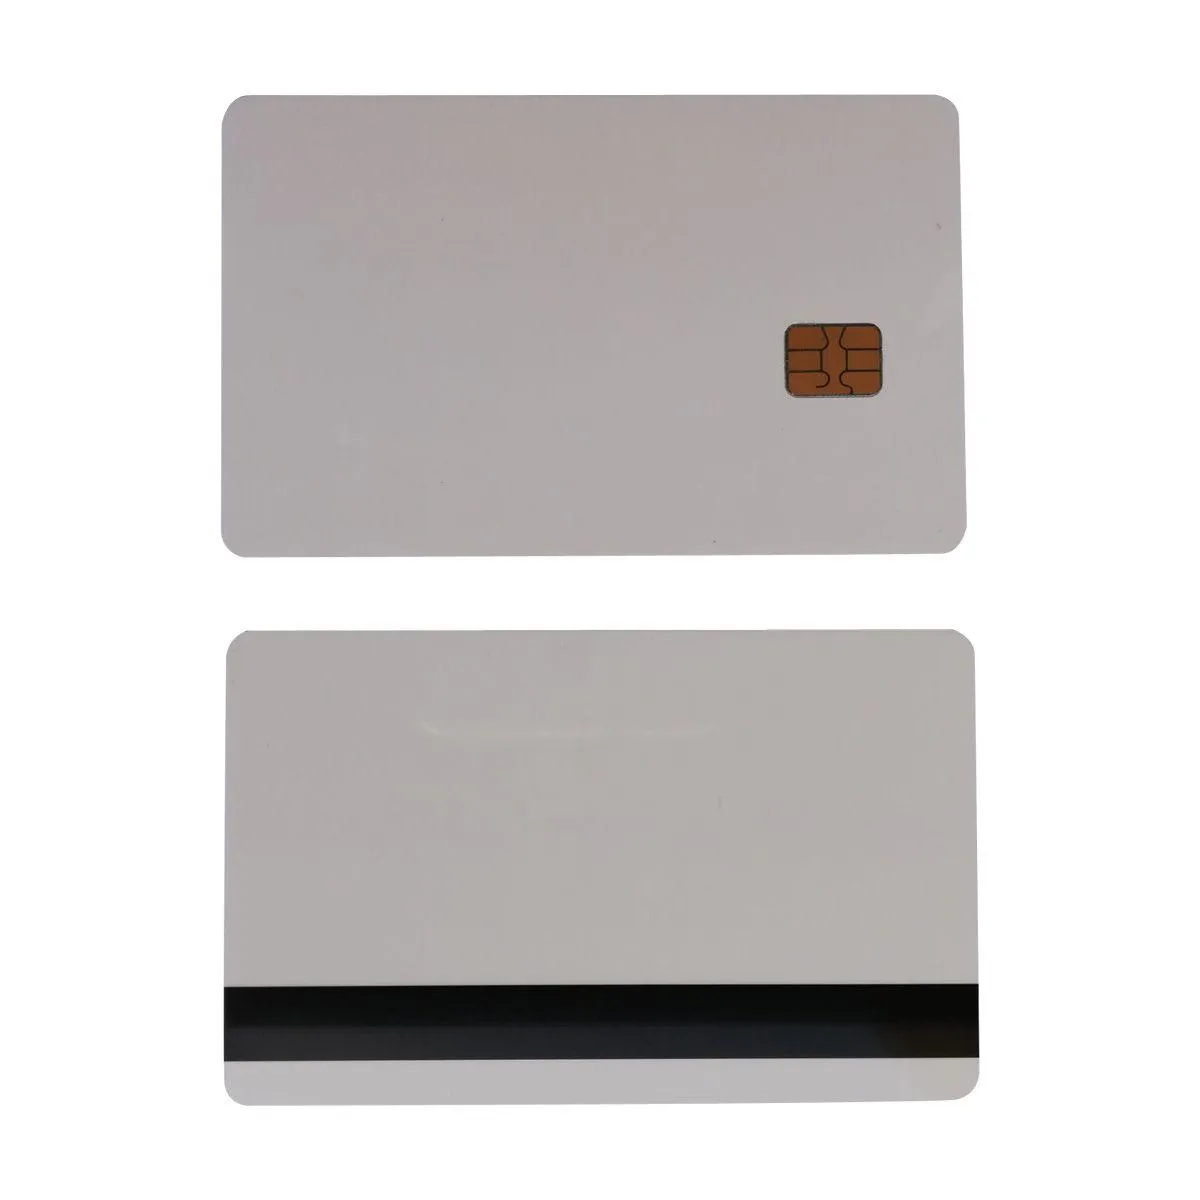 Access Control Card 10st White SLE4442 Kontakt Chip PVC Smart med 8,4 mm HICO Magnet Stripe Drop Delivery Security Surveillance in DH6B7